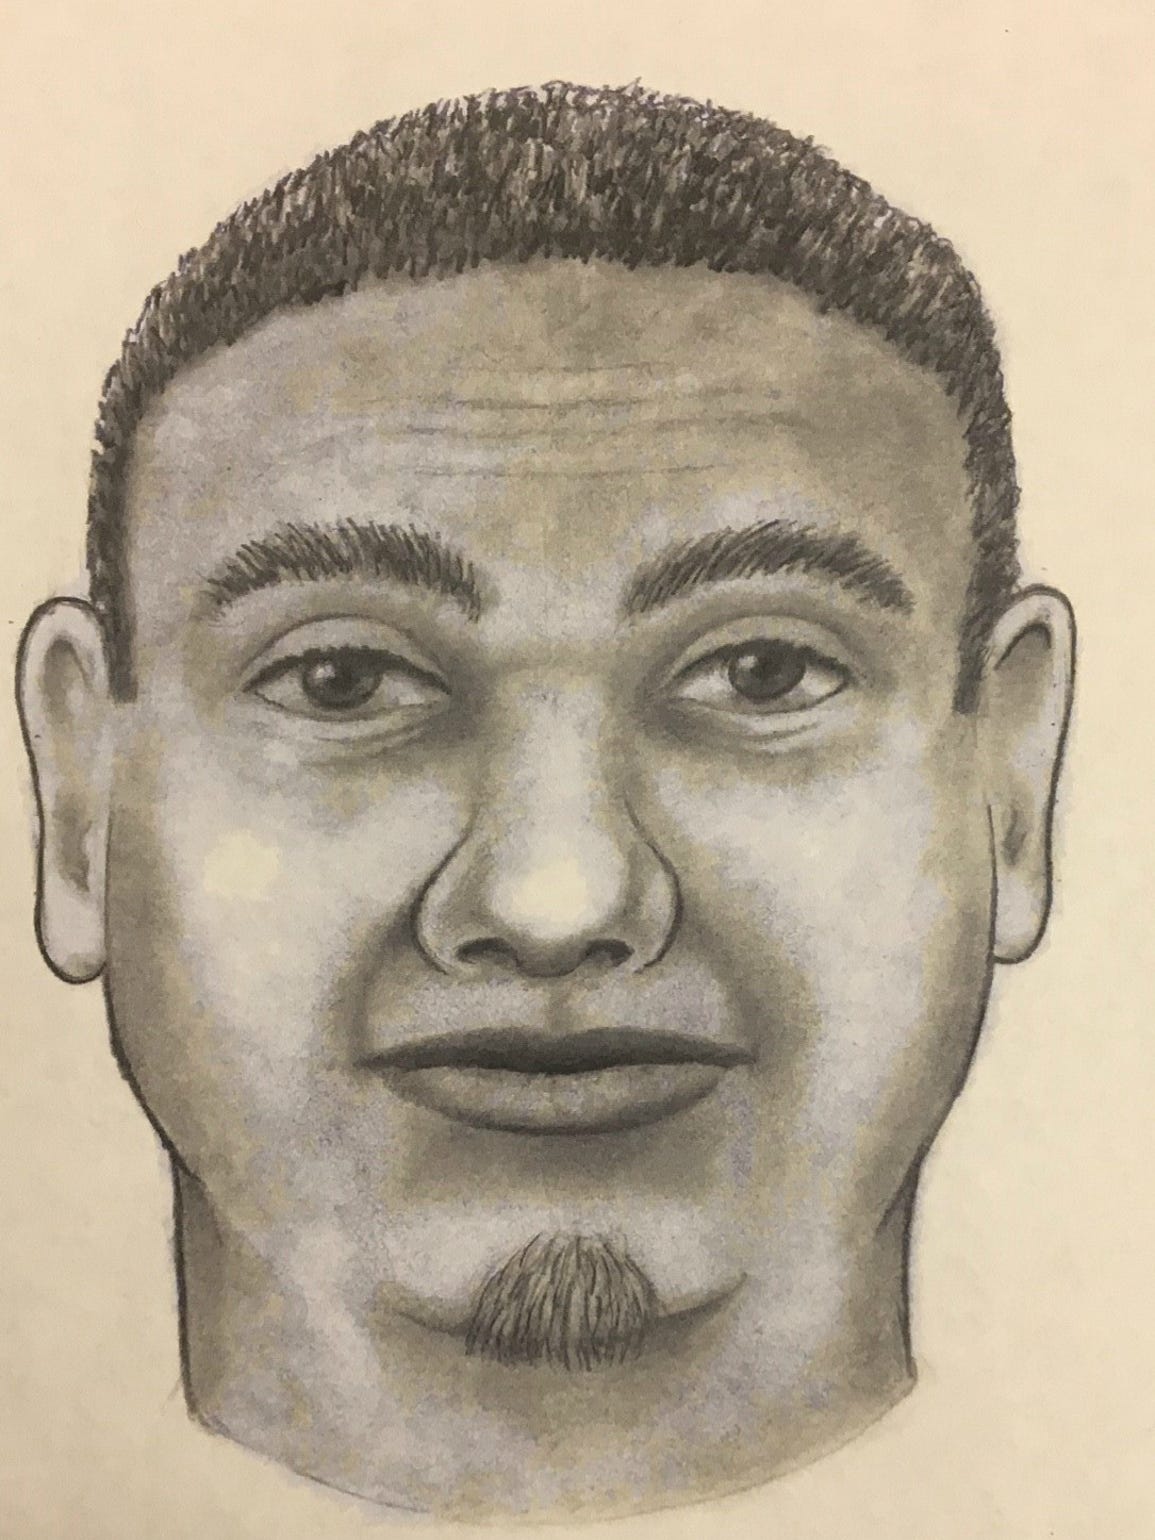 Yuma police circulated this sketch of a the man suspected